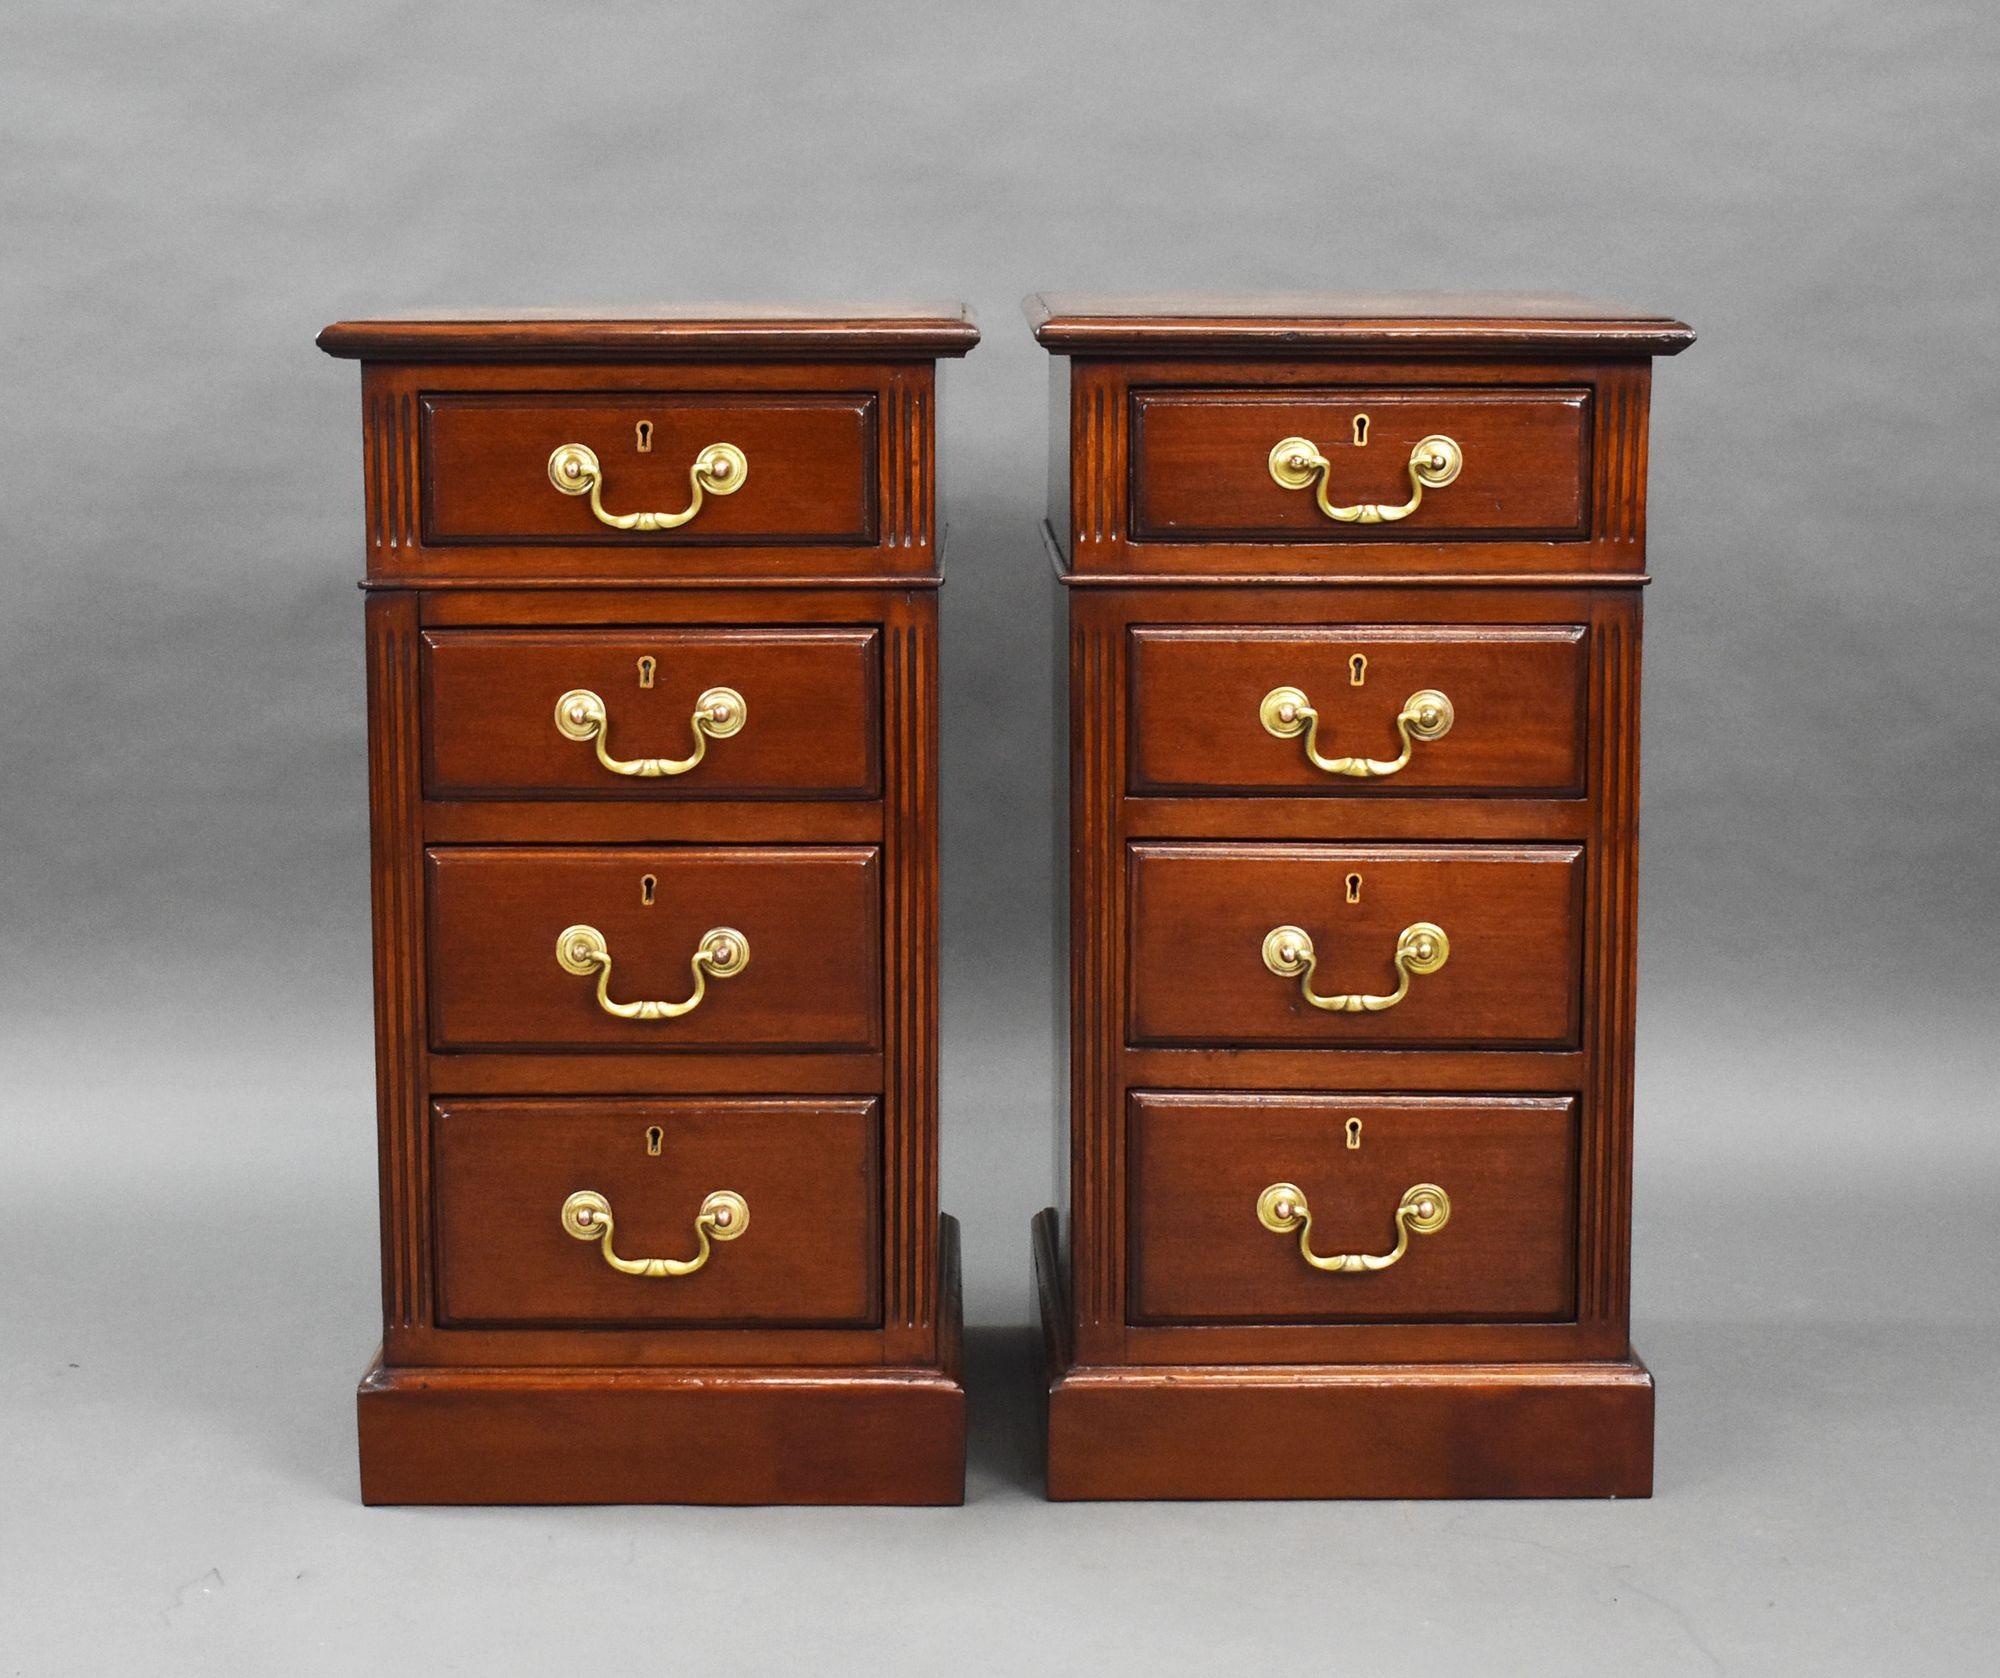 For sale is a good quality pair of Edwardian mahogany bedside chests, each chest has an arrangement of four graduated drawers with brass handles, raised on a plinth base, both chests are in excellent condition.

Width: 38cm Depth: 41cm Height: 70cm